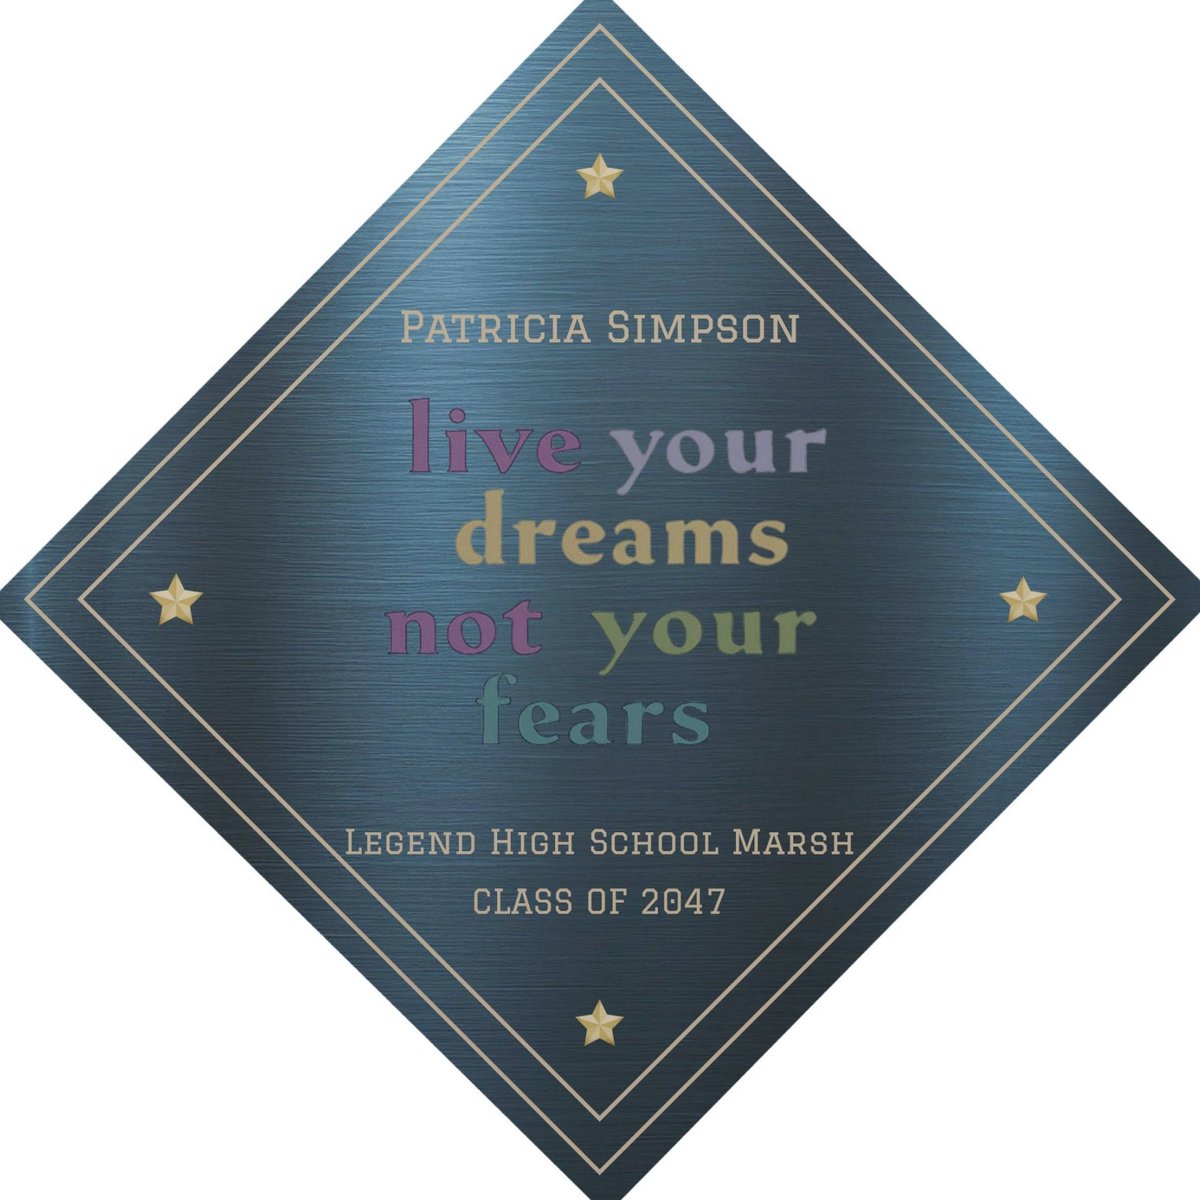 Chase Your Dreams Fearlessly zazzle.com/chase_your_dre… Cap Topper #zazzle #zazzlemade #Graduation #CapTopper #collegefun #college #highschool #School #personalizedgifts #personalisedgifts #uniquegifts #gift #gifts #giftidea #giftideas #giftshop #giftforhim #giftsforher #giftsforhim